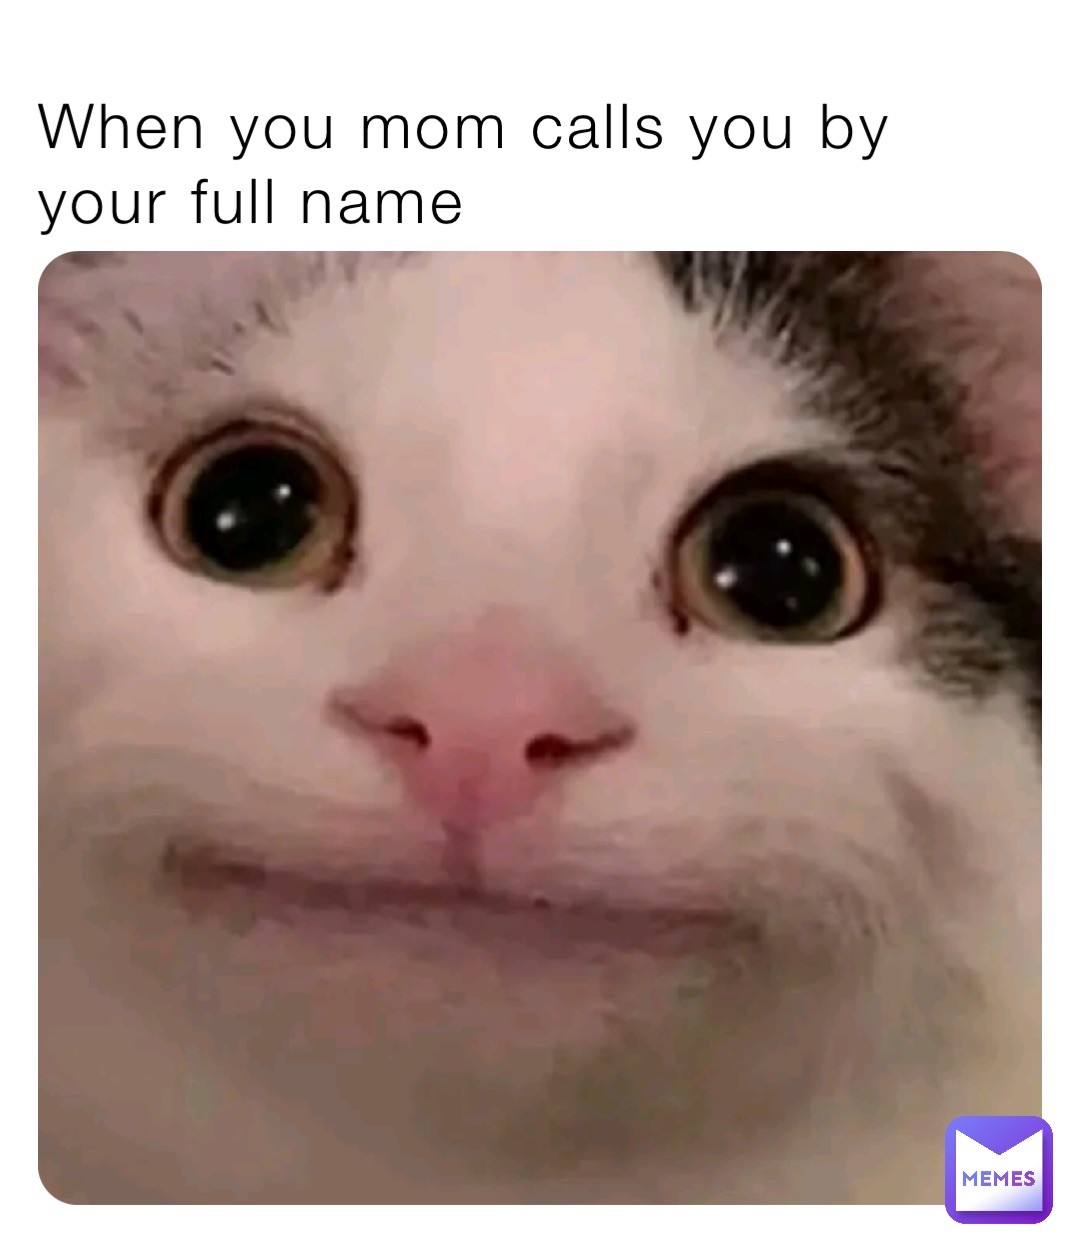 When you mom calls you by your full name